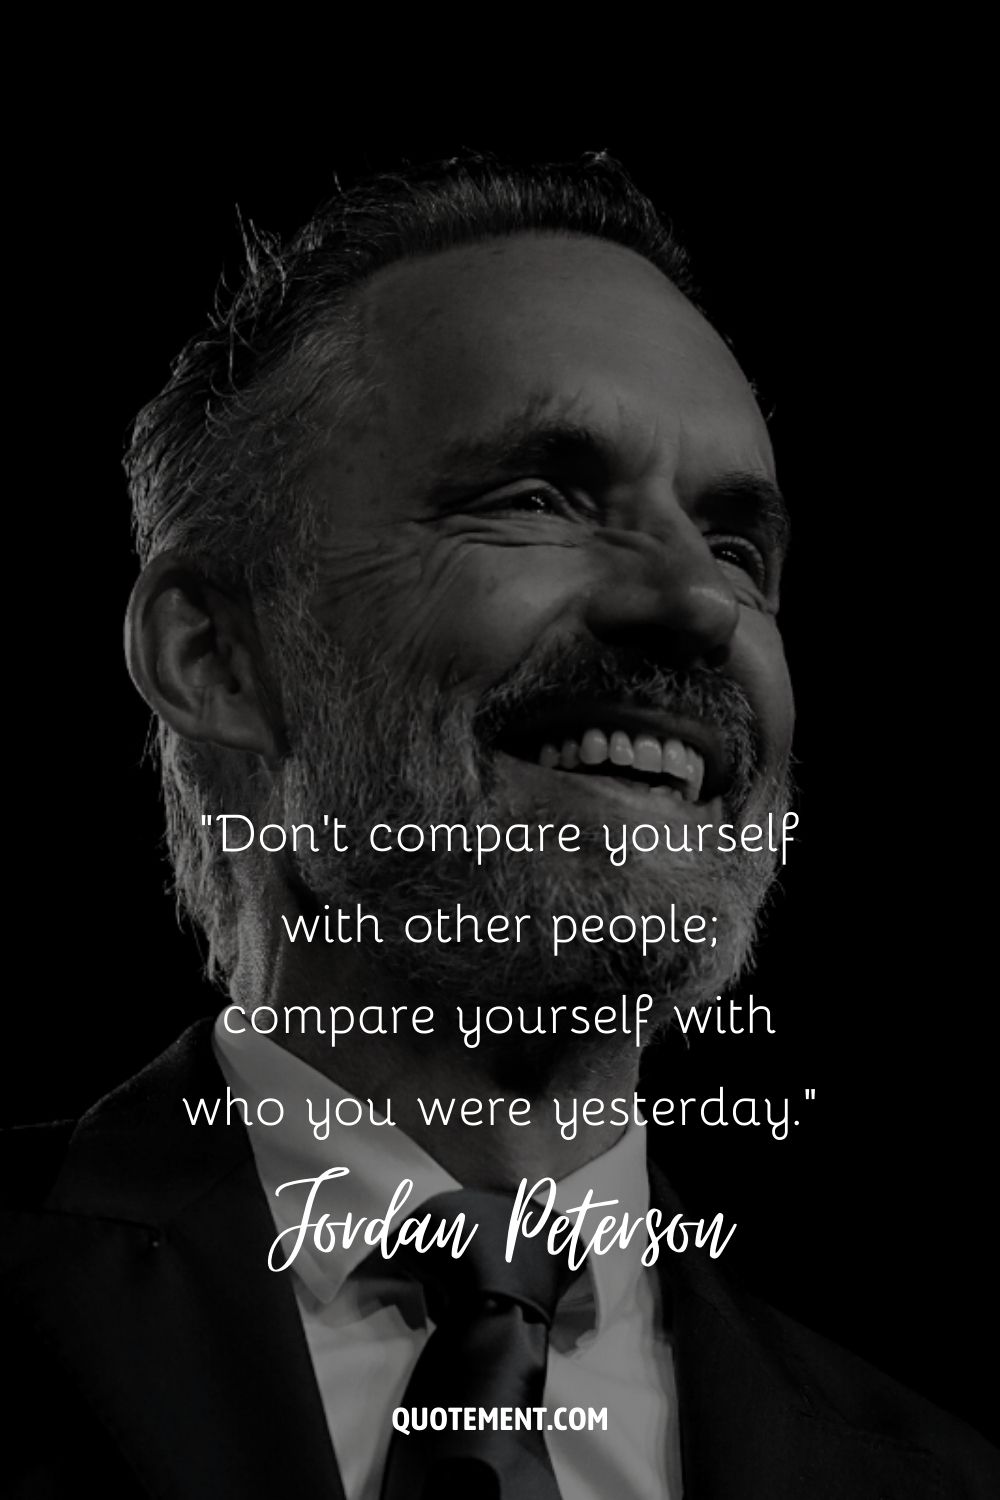 Jordan Peterson quote about comparing yourself to other people.